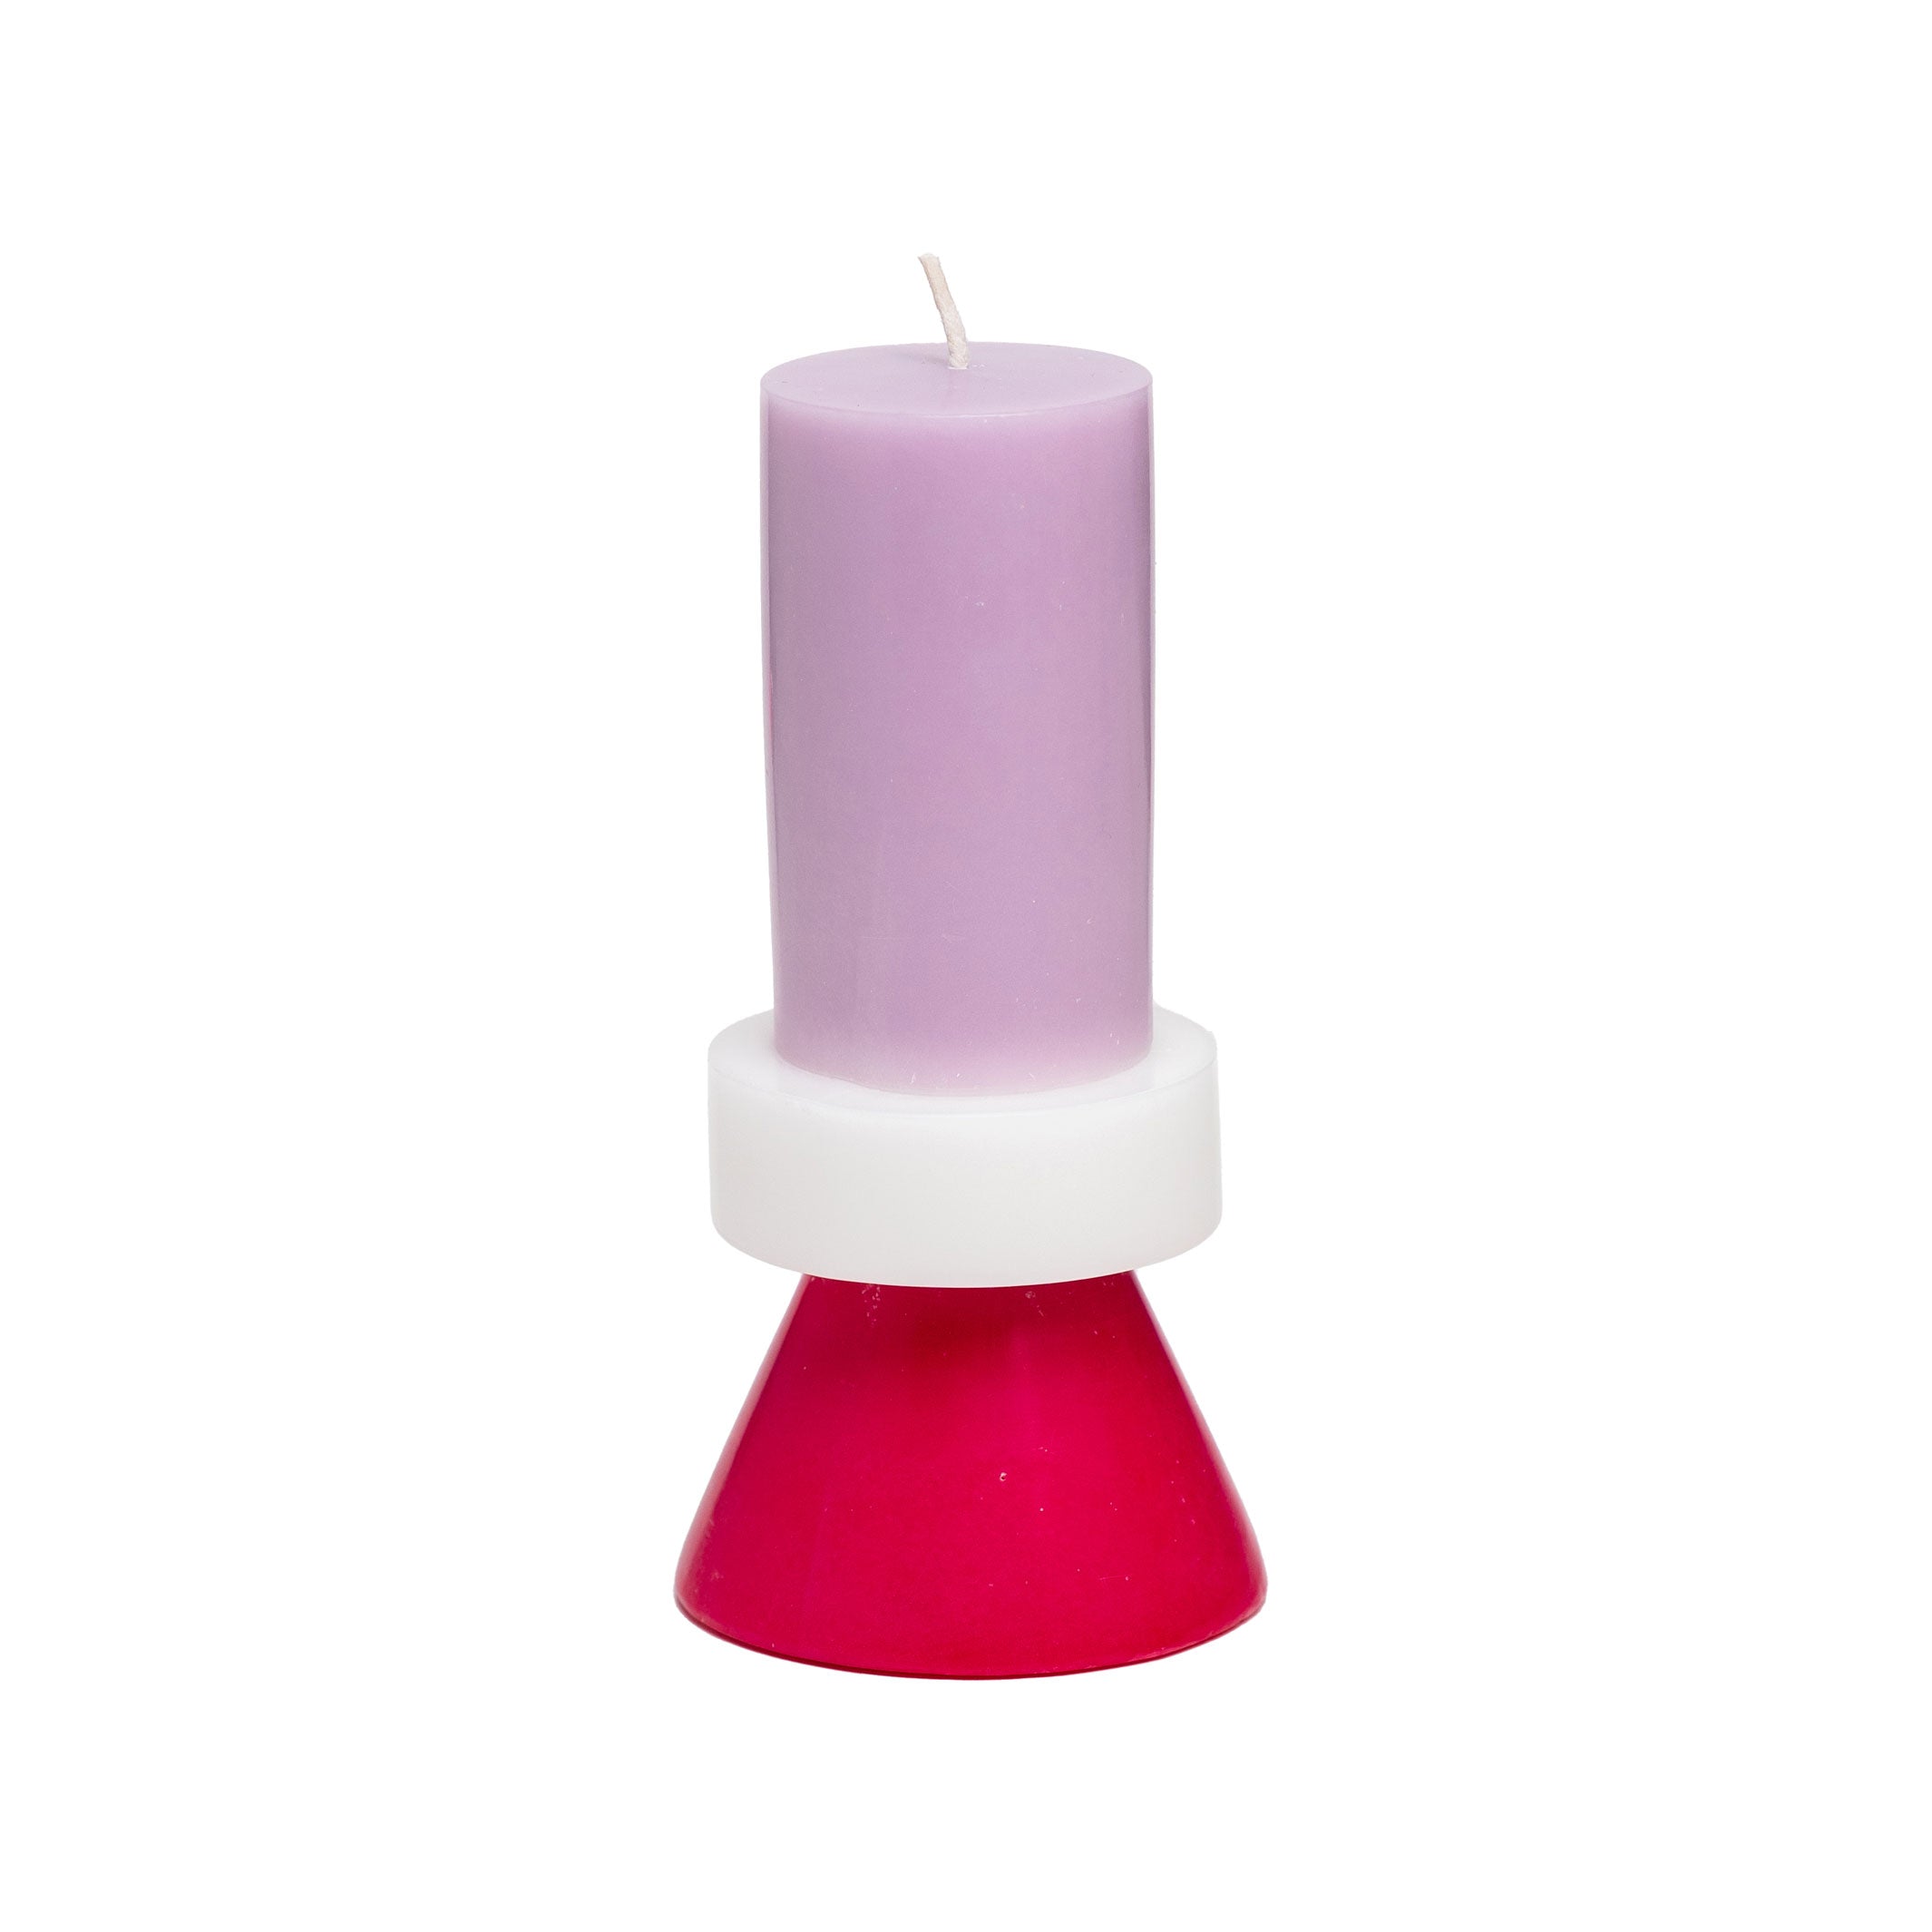 STACK CANDLE TALL | KERZE in Farben violet-white-geranium | 30 Std. Brenndauer | YOD AND CO